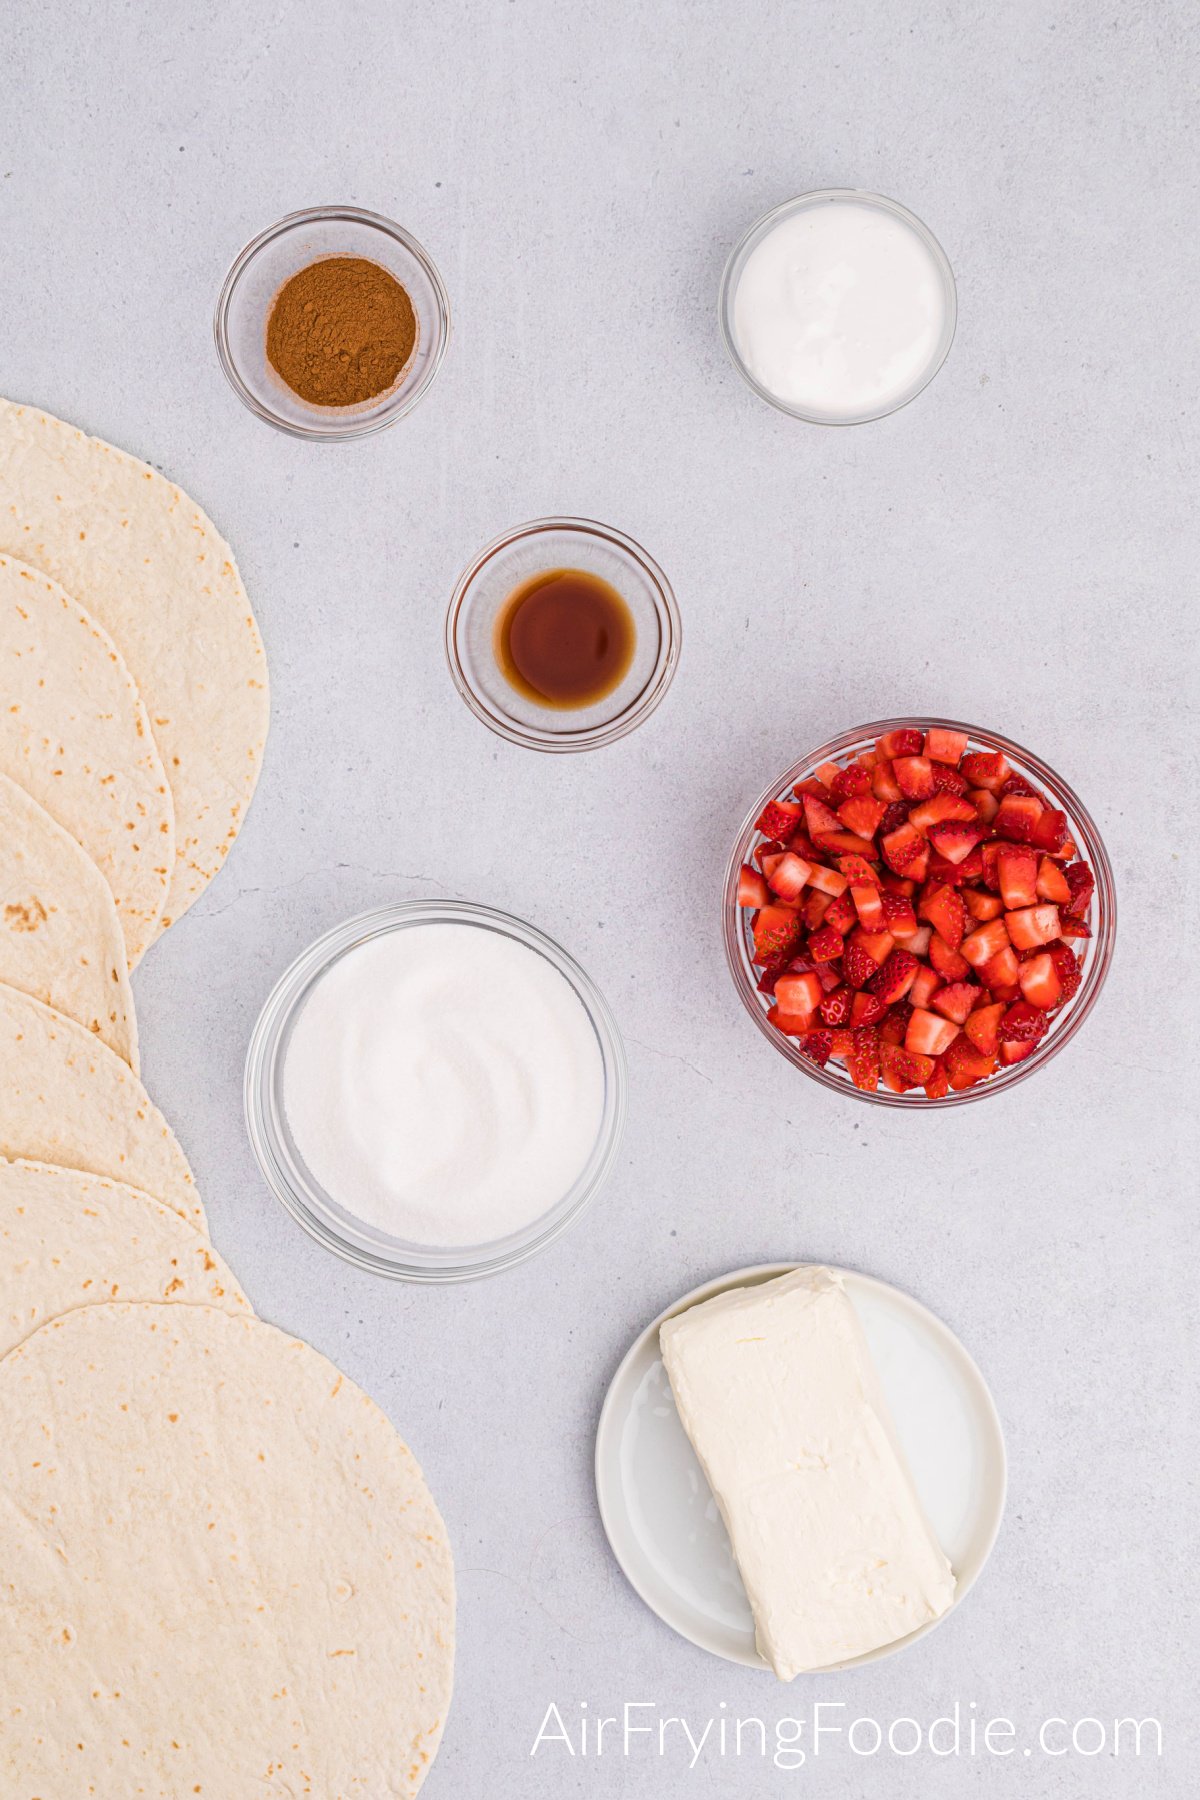 Ingredients shot with everything you need to make air fryer strawberry cheesecake chimichangas. To the left of the picture is a line of tortillas. The bottom of the image has a small rimmed white plate with a block of cream cheese. The rest of the photograph are bowls, each containing an ingredient; sugar, cut-up strawberries, vanilla extract, cinnamon, and marshmallow cream.